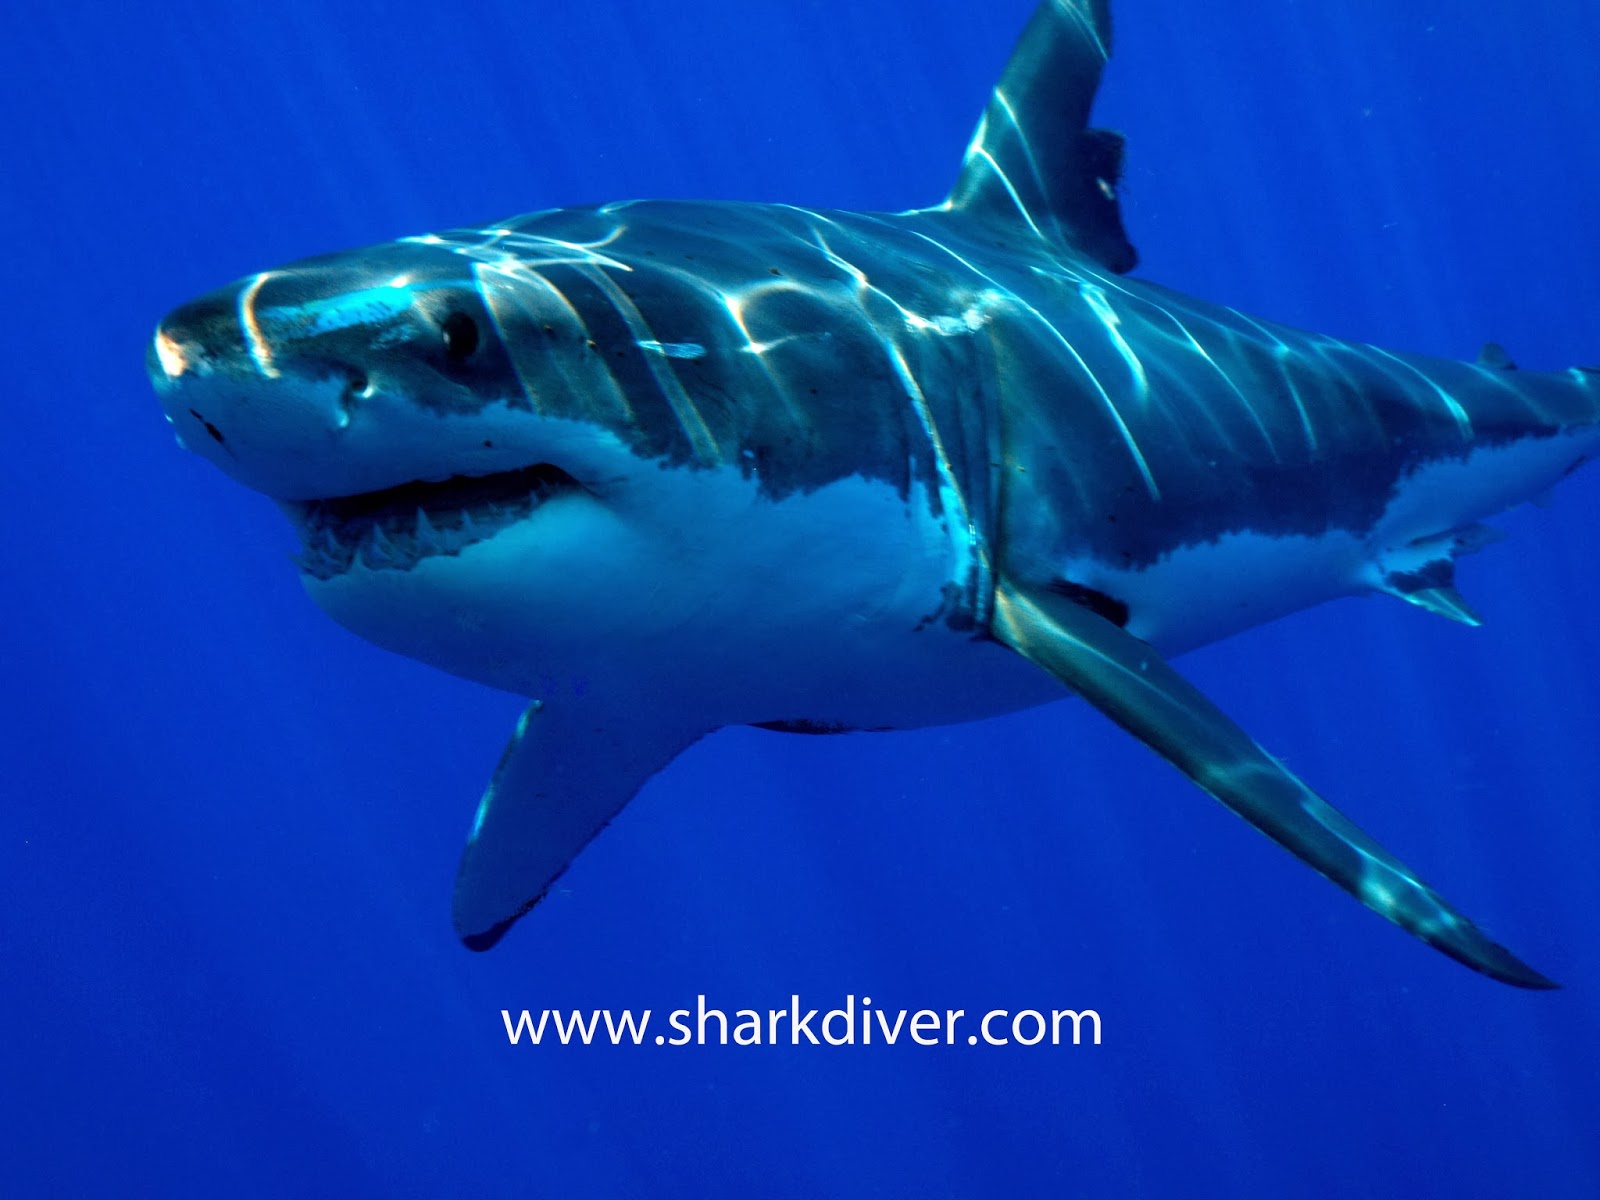 Shark Diver : Shark Diving : Swimming With Sharks: Another catch and